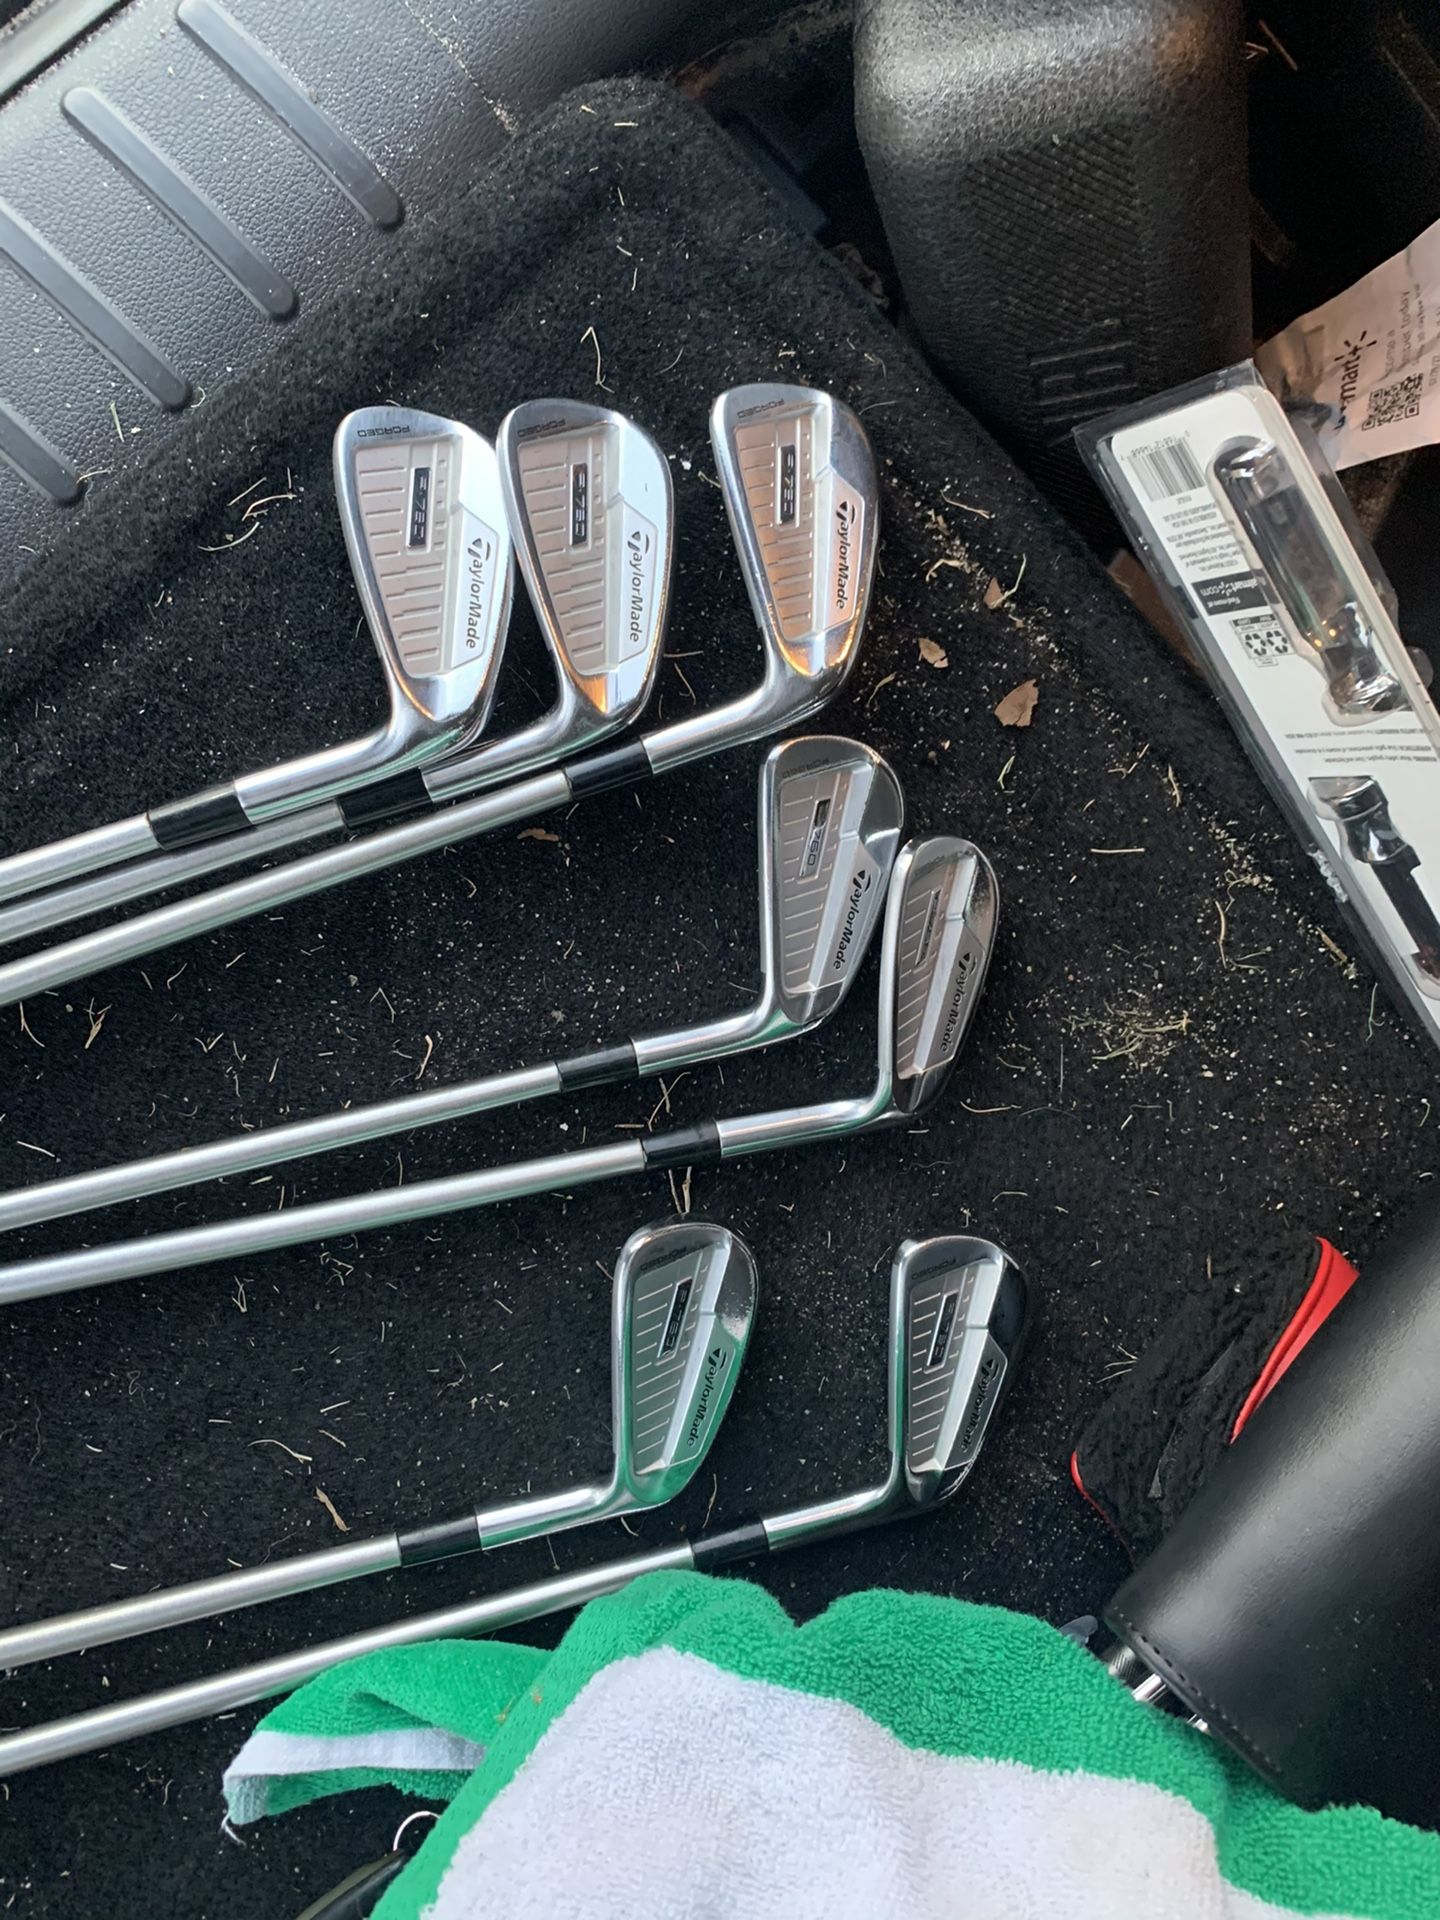 TaylorMade irons And driver